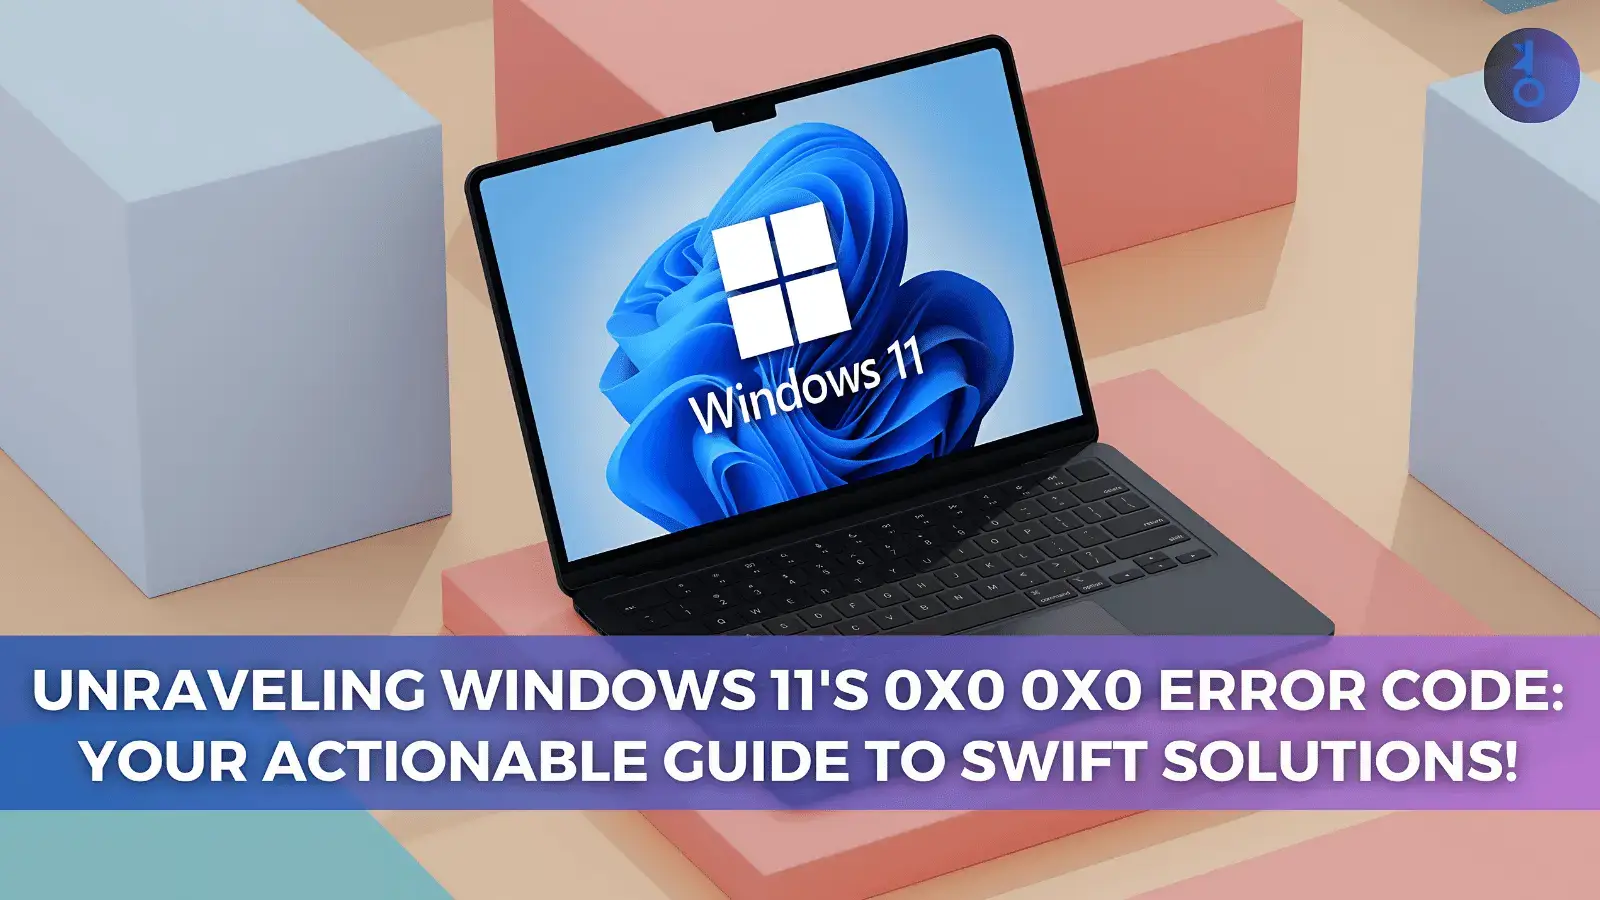 Unraveling Windows 11’s 0x0 0x0 Error Code Your Actionable Guide to Swift Solutions